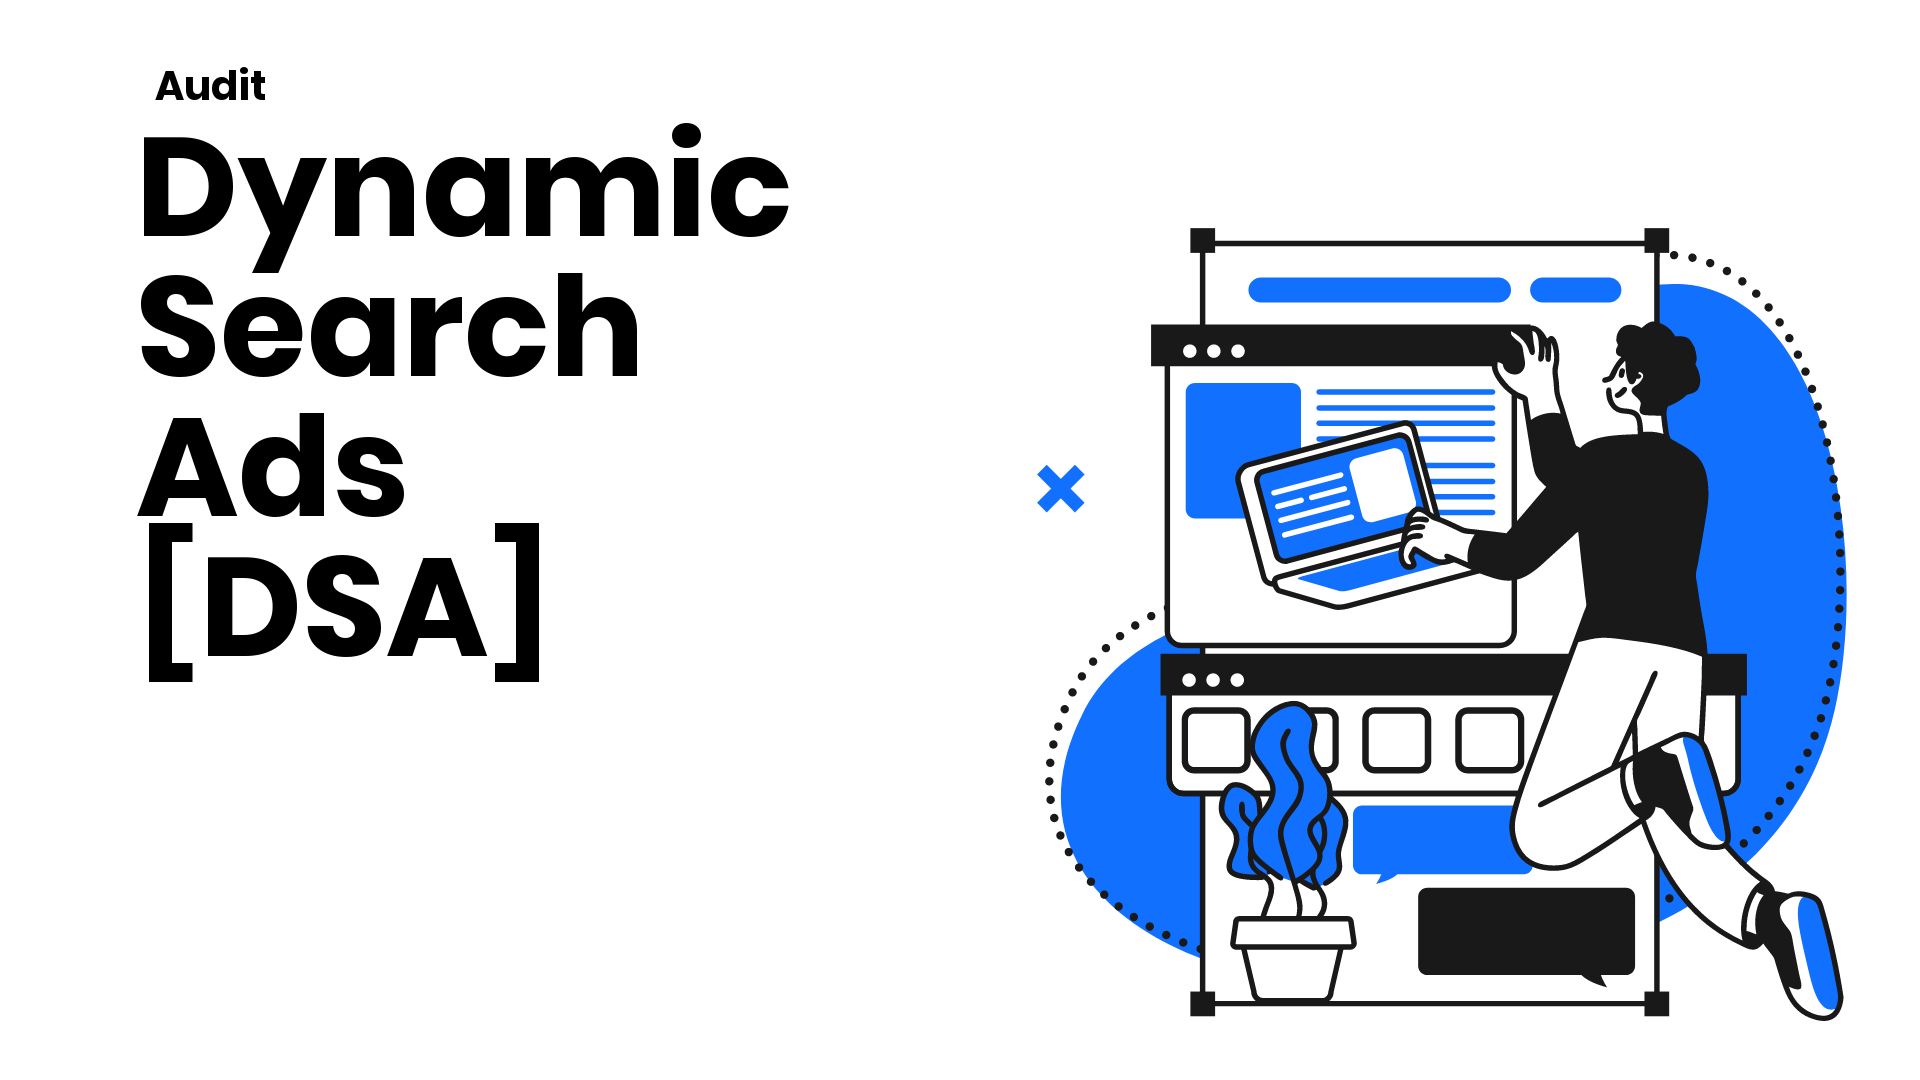 How to audit Dynamic Search Ads [DSA] in Google Ads